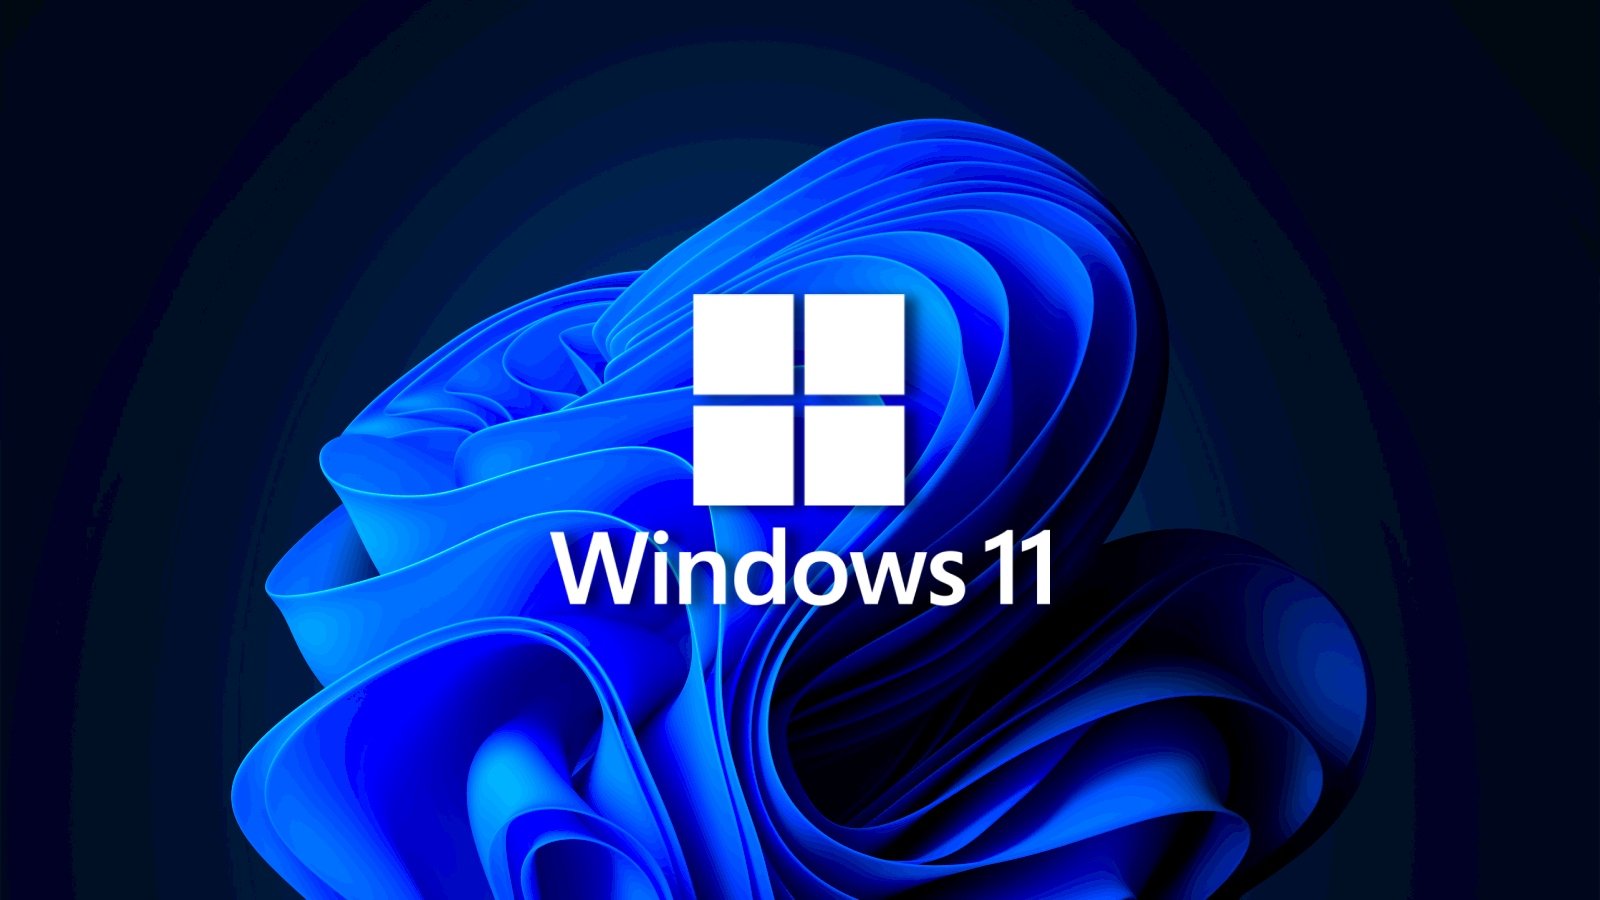 Windows 11 to ask for permission before pinning applications